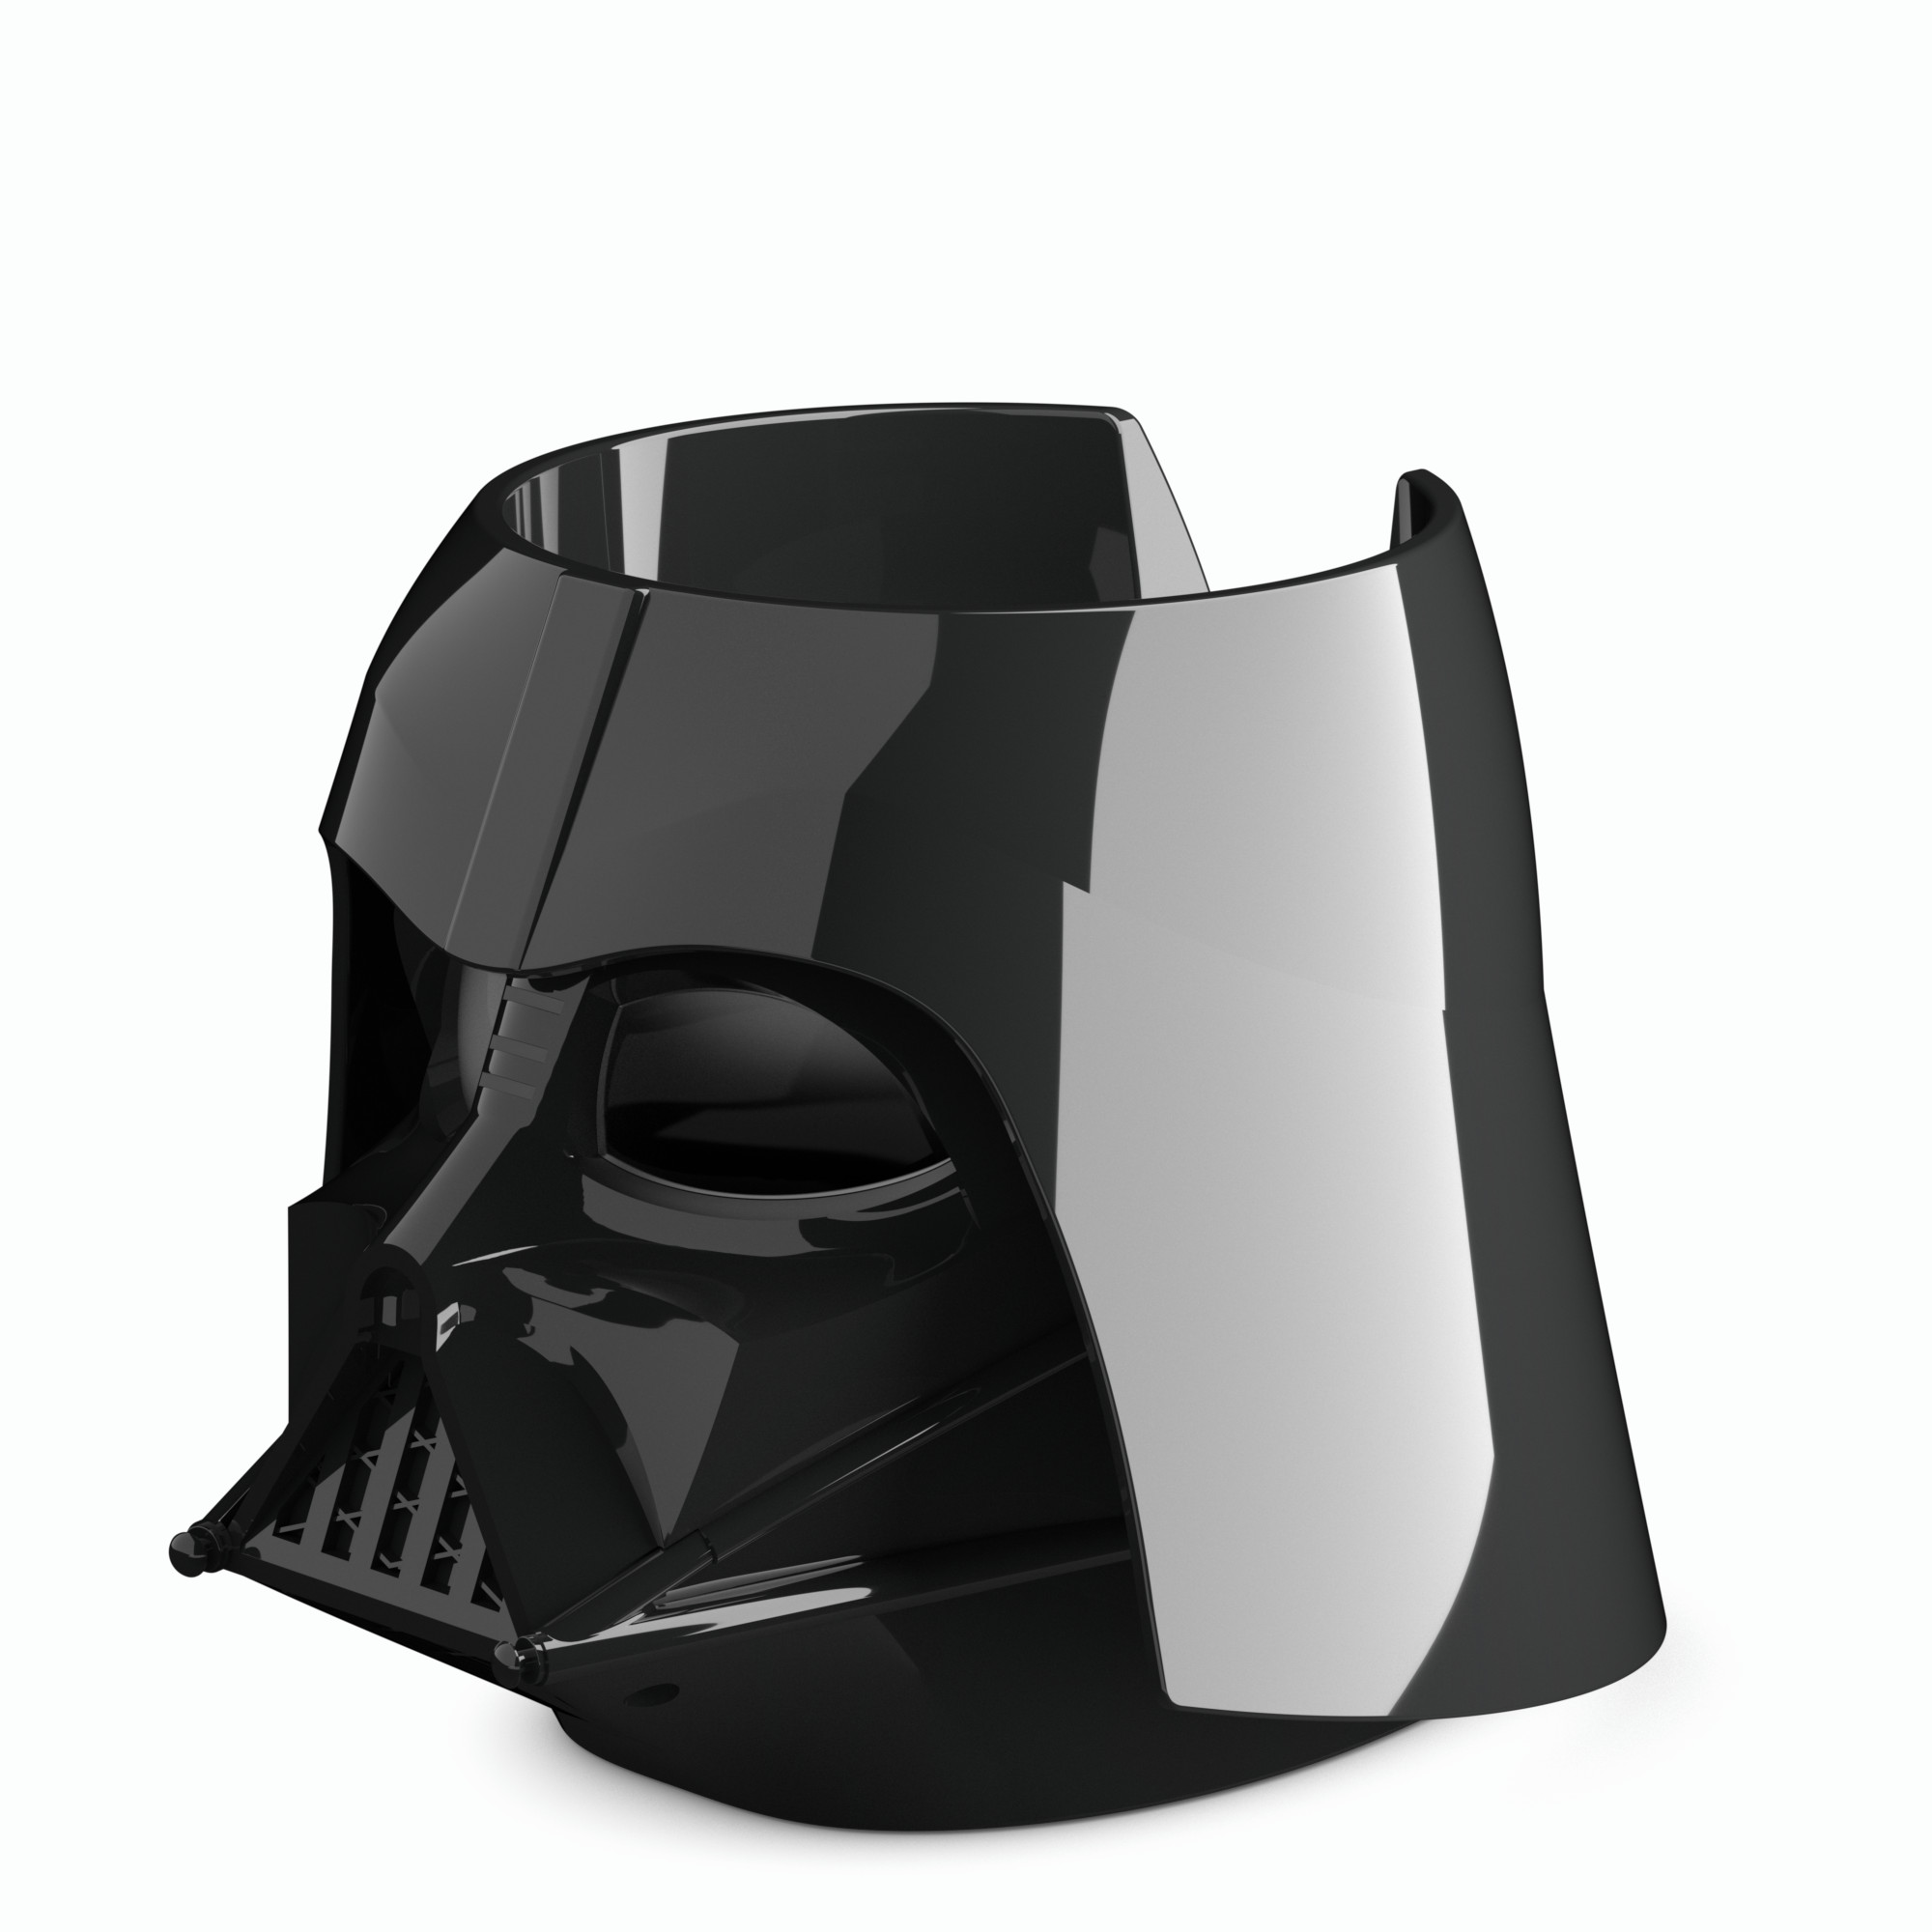 Product render of Darth Vader Helmet. Lighting, compositing, and material creation were made in Cinema4D